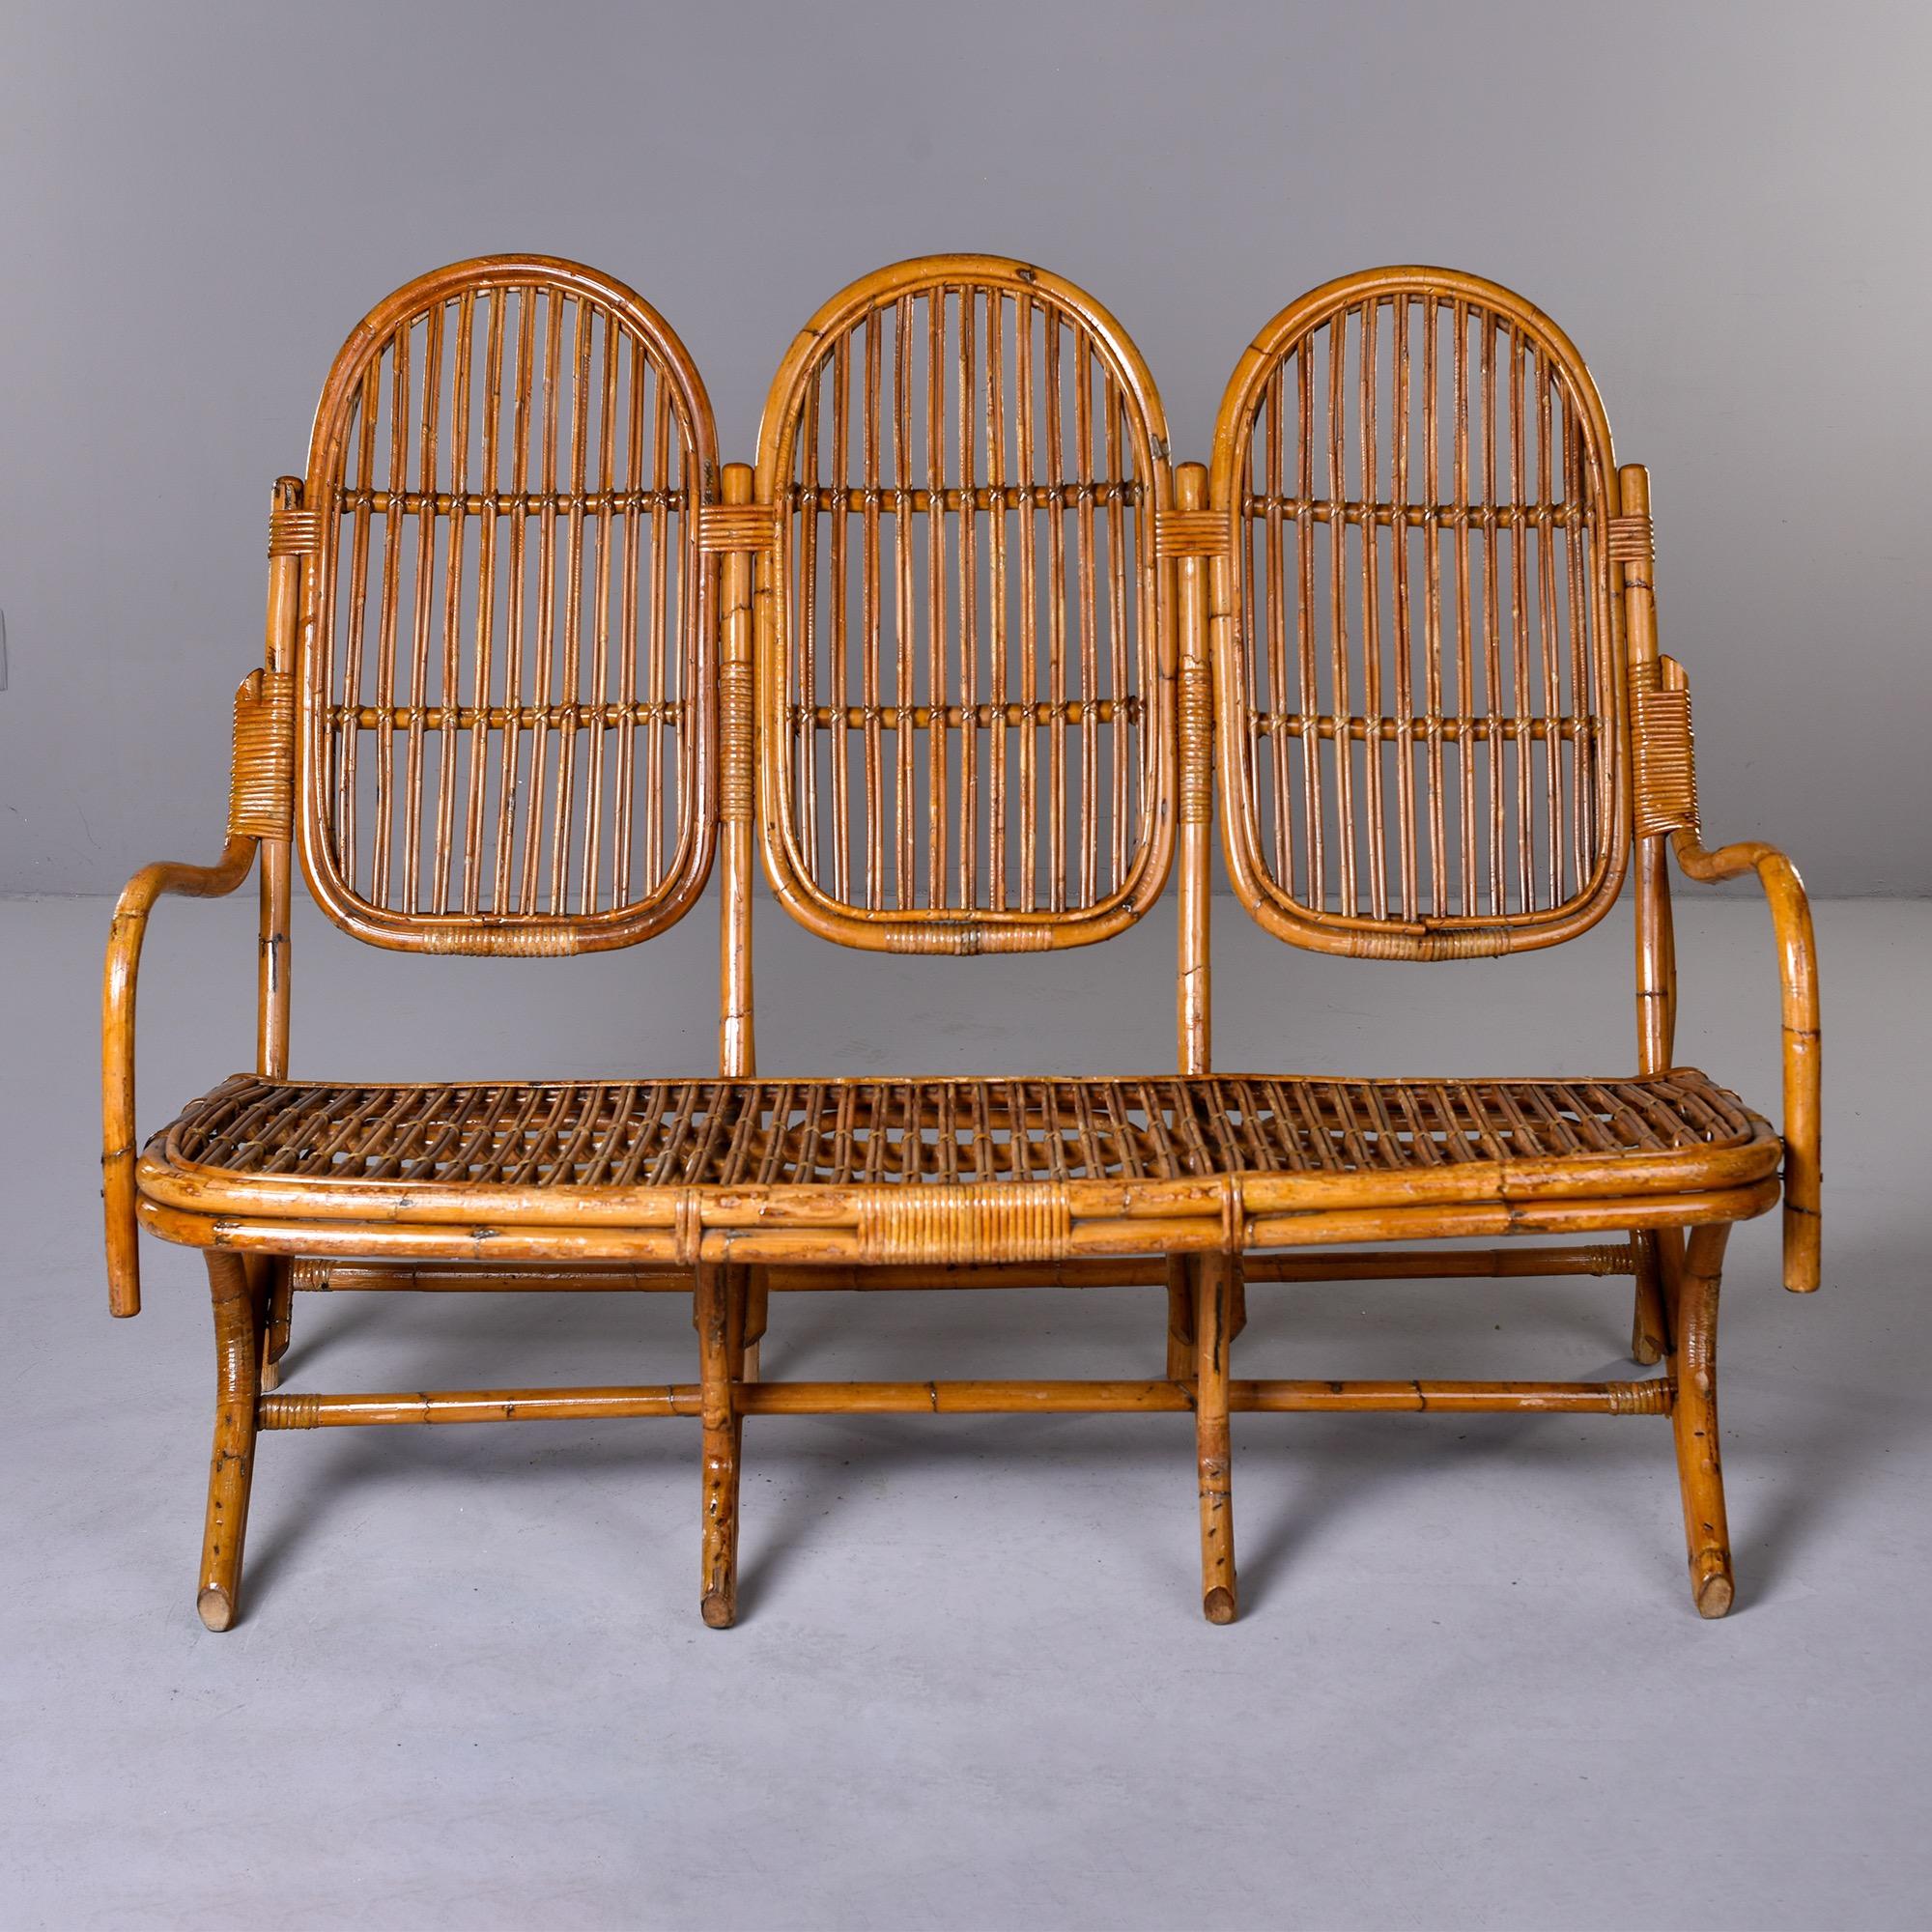 Found in Italy, this three seat rattan settee dates from approximately 1940. Very good vintage condition. Unknown maker

Measures: arm height: 27” seat height: 19.5”
Seat depth: 19.5” seat width: 54.